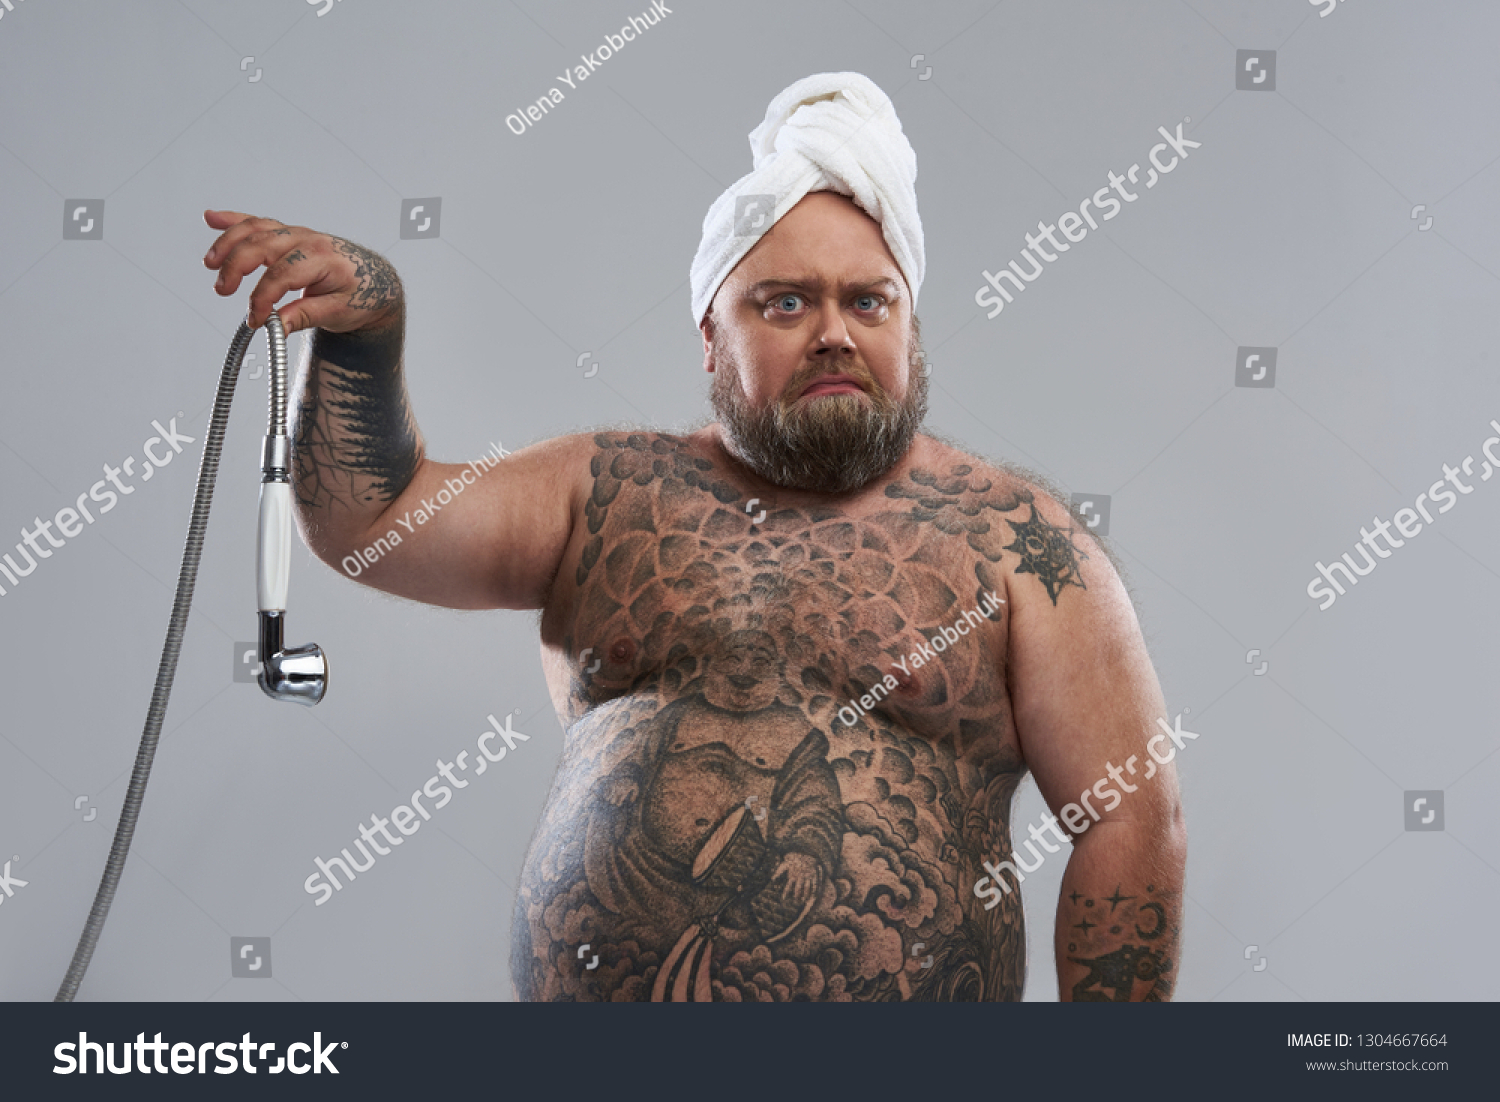 Tattooed fat man with towel on his head standing isolated on the grey background and frowning while holding shower hose with two fingers #1304667664